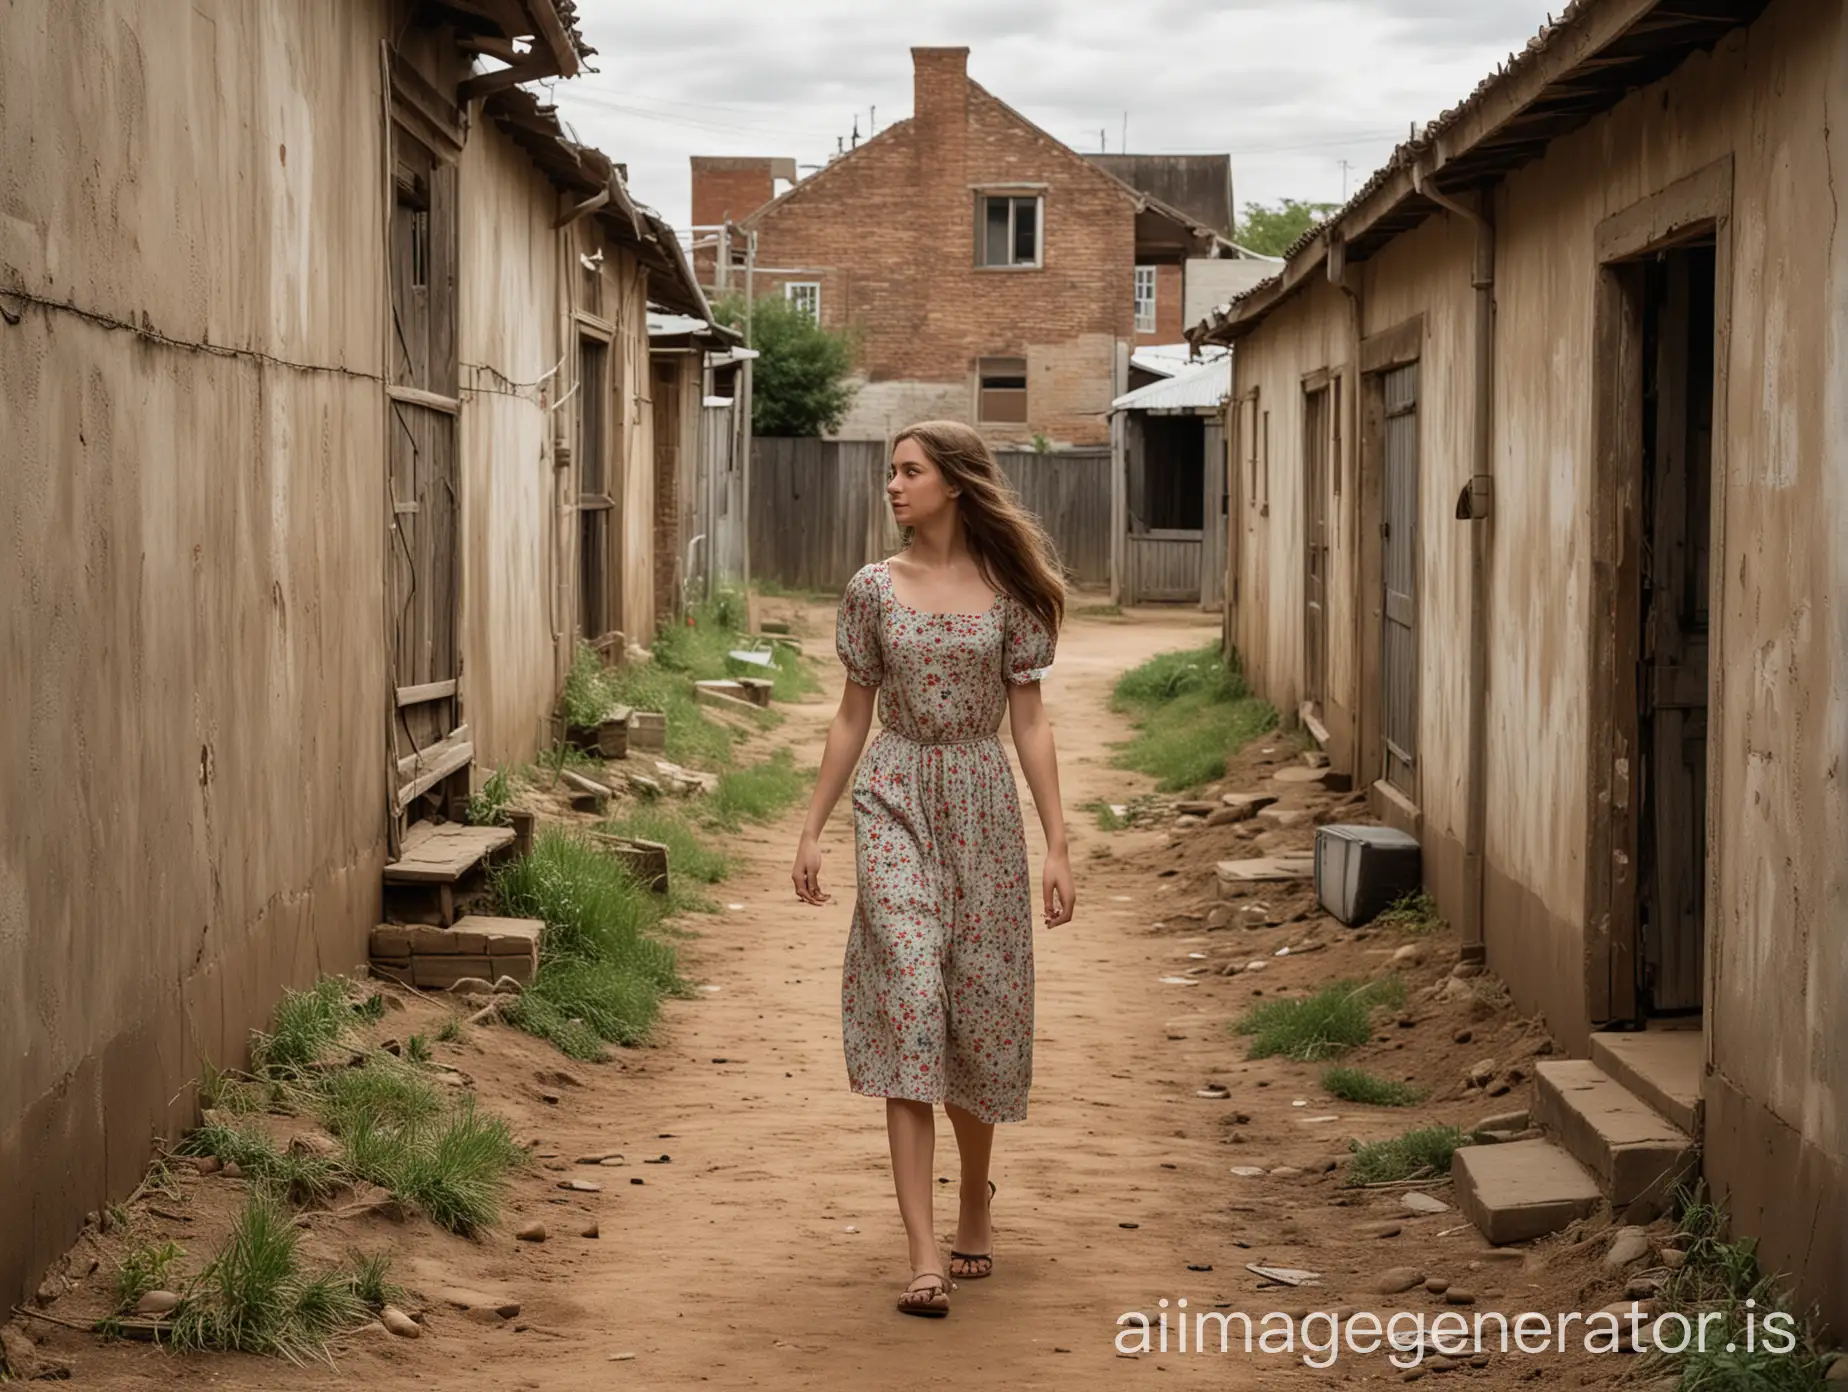 A young and beautiful woman in her local dress walks down a dirt alley towards an old house. There are many houses in this alley and all of them are old